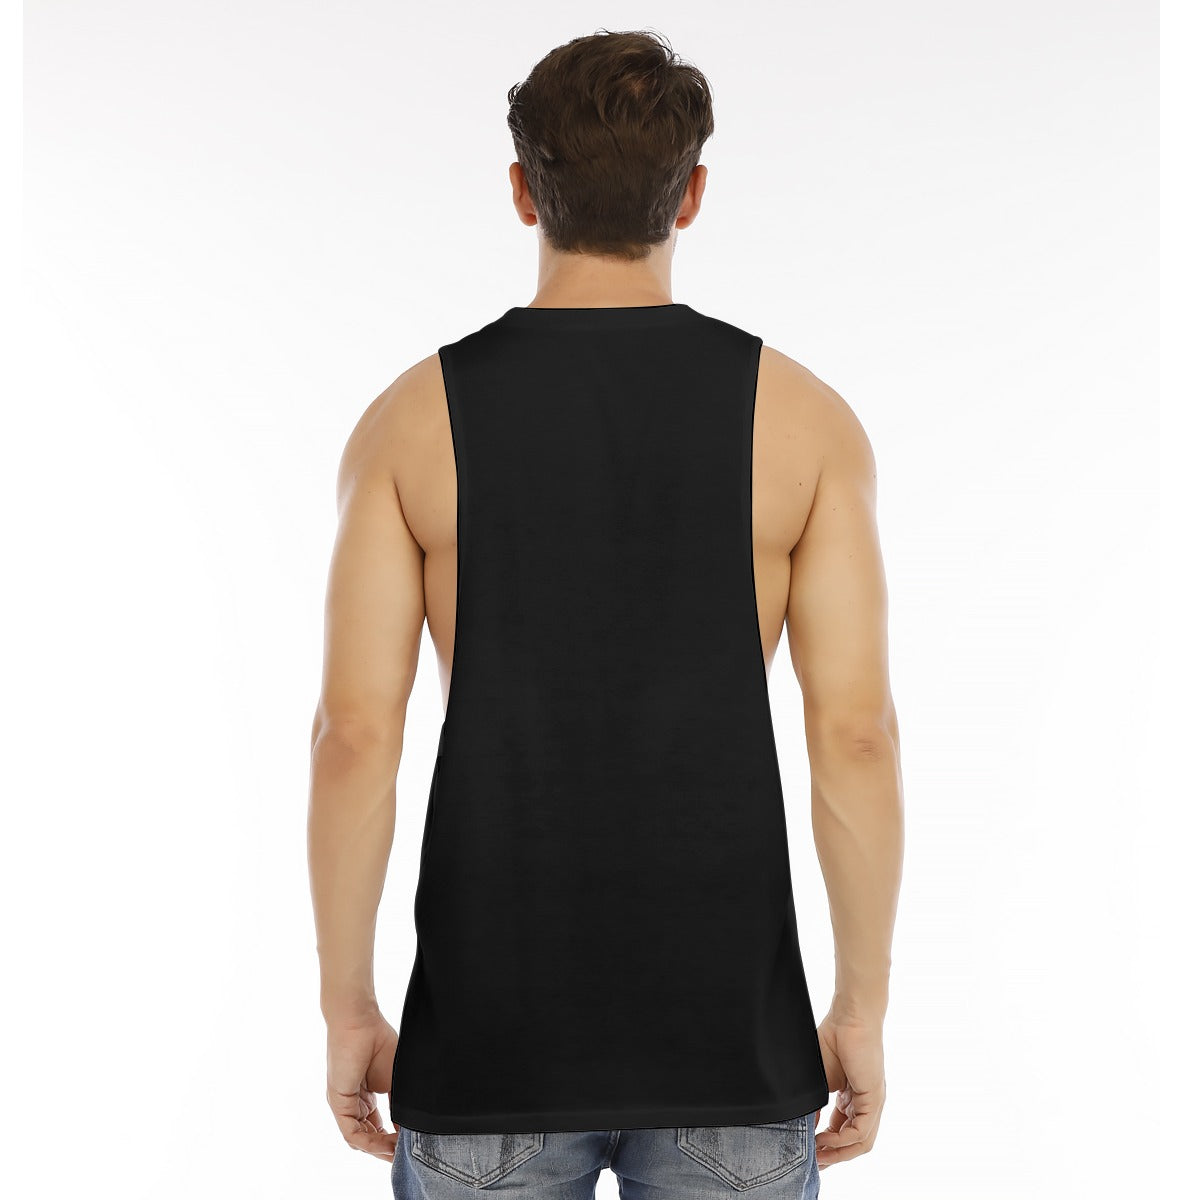 "Stand Out" Tank Top